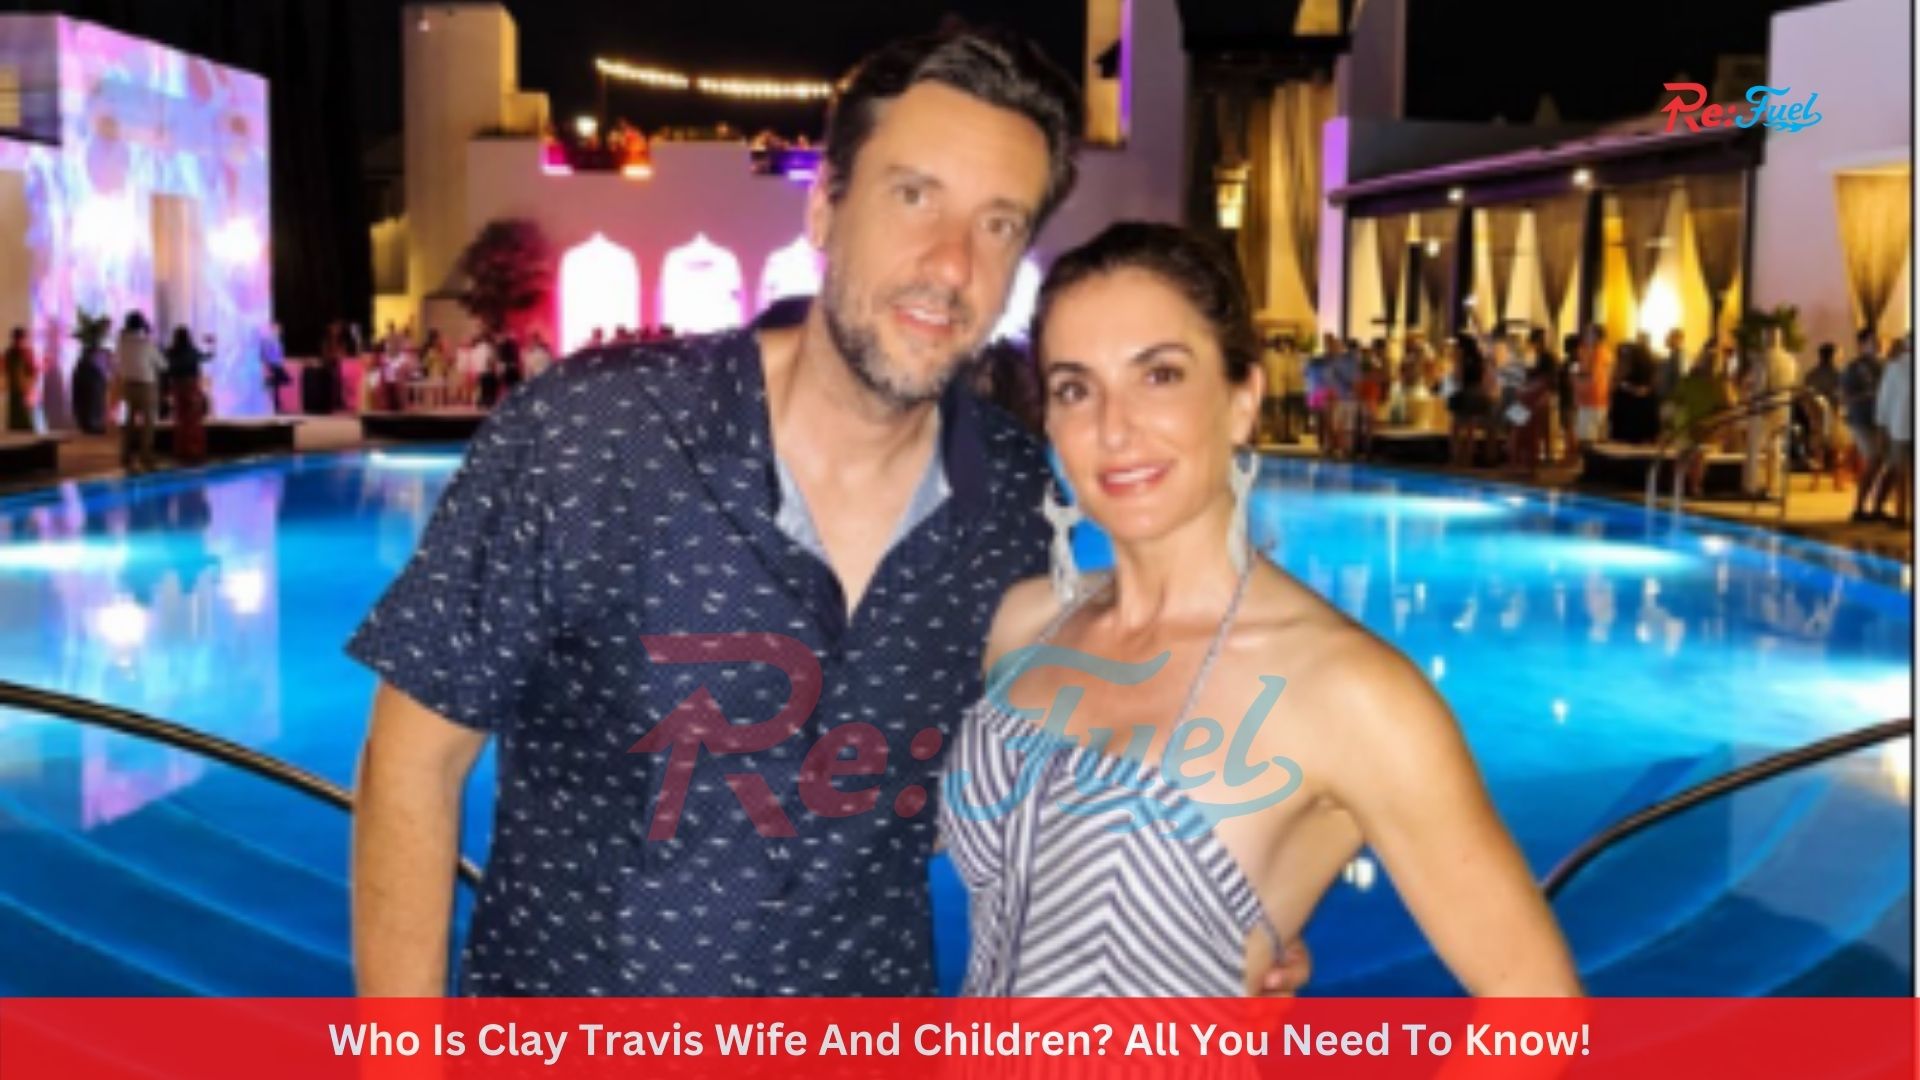 Who Is Clay Travis Wife And Children? All You Need To Know!